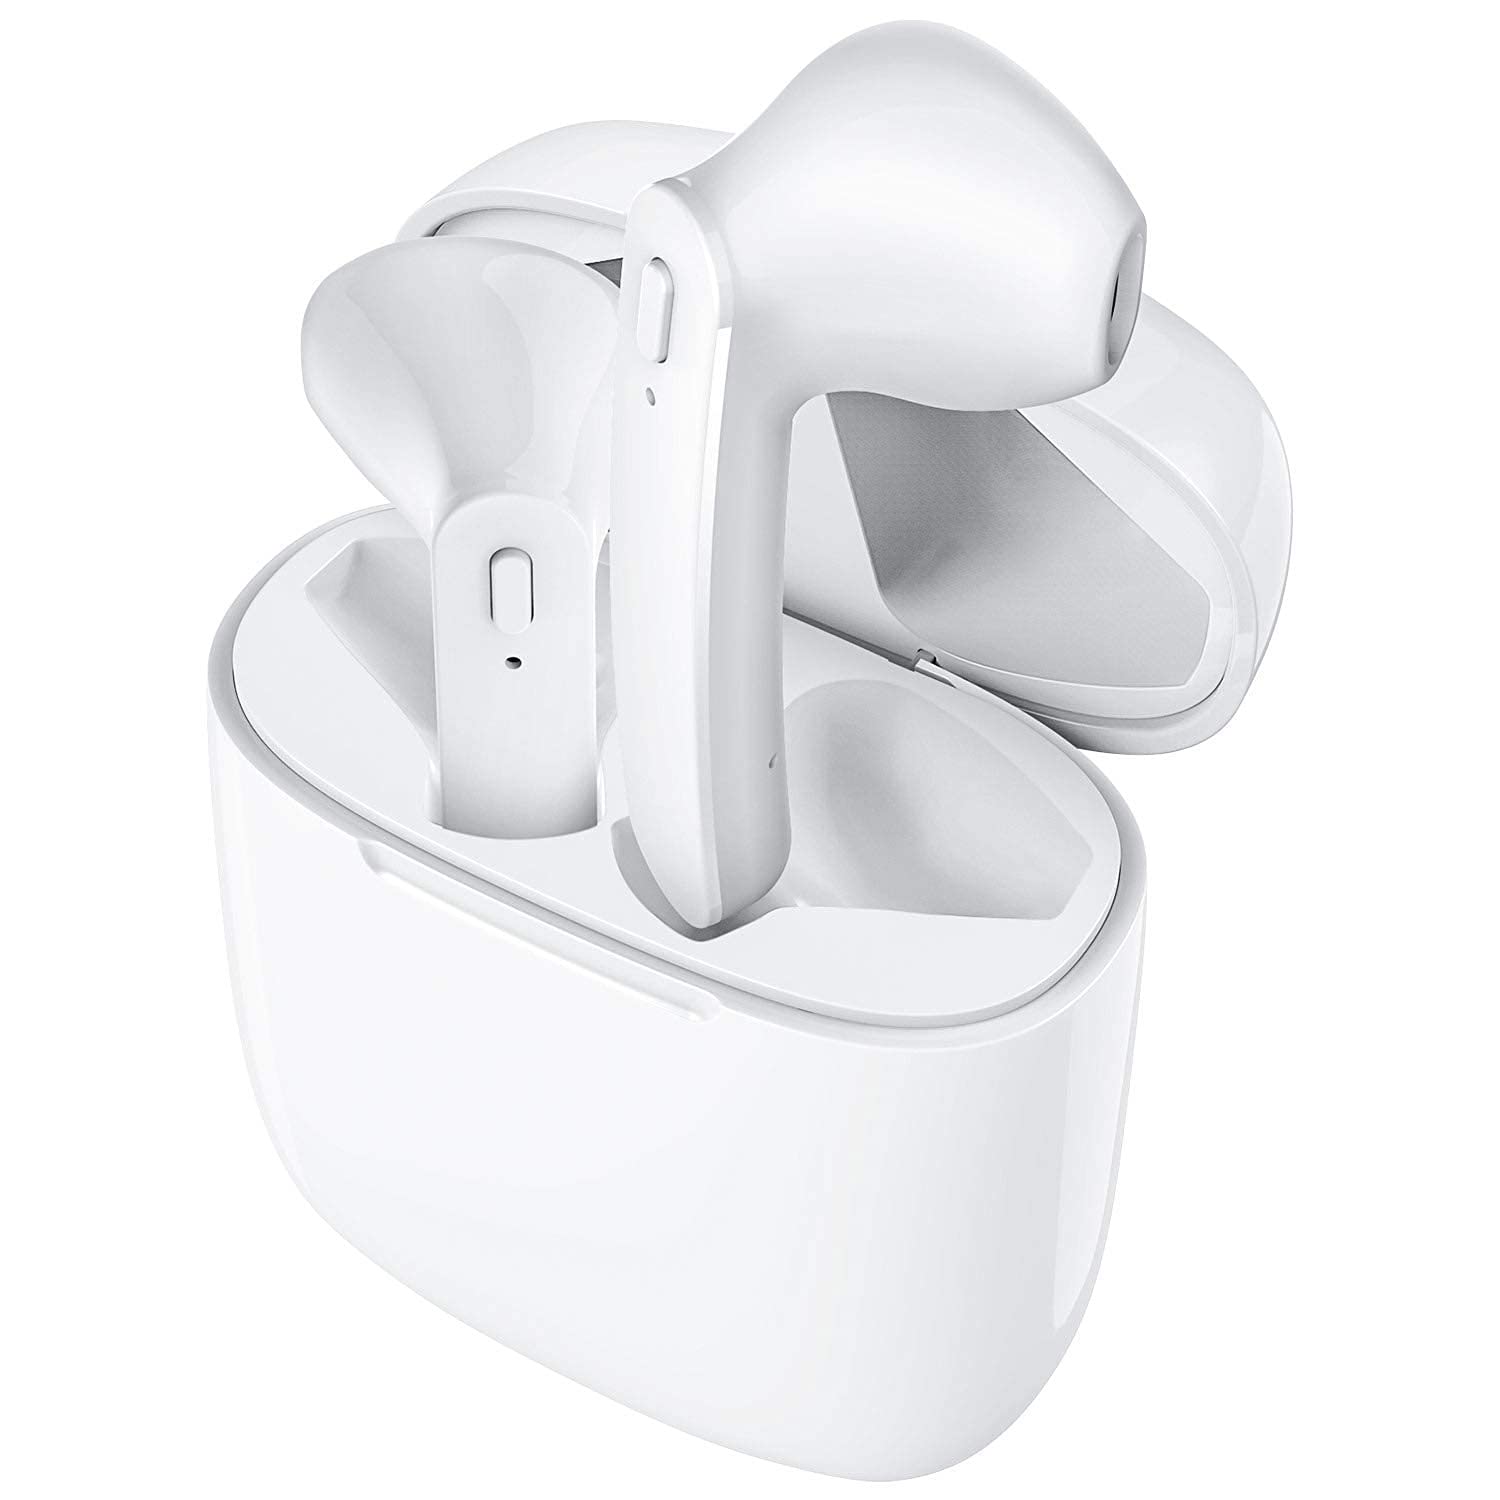 Buy HST Enterprises Twins7s Truly Wireless Bluetooth In Ear Headset with Mic (Floral White)